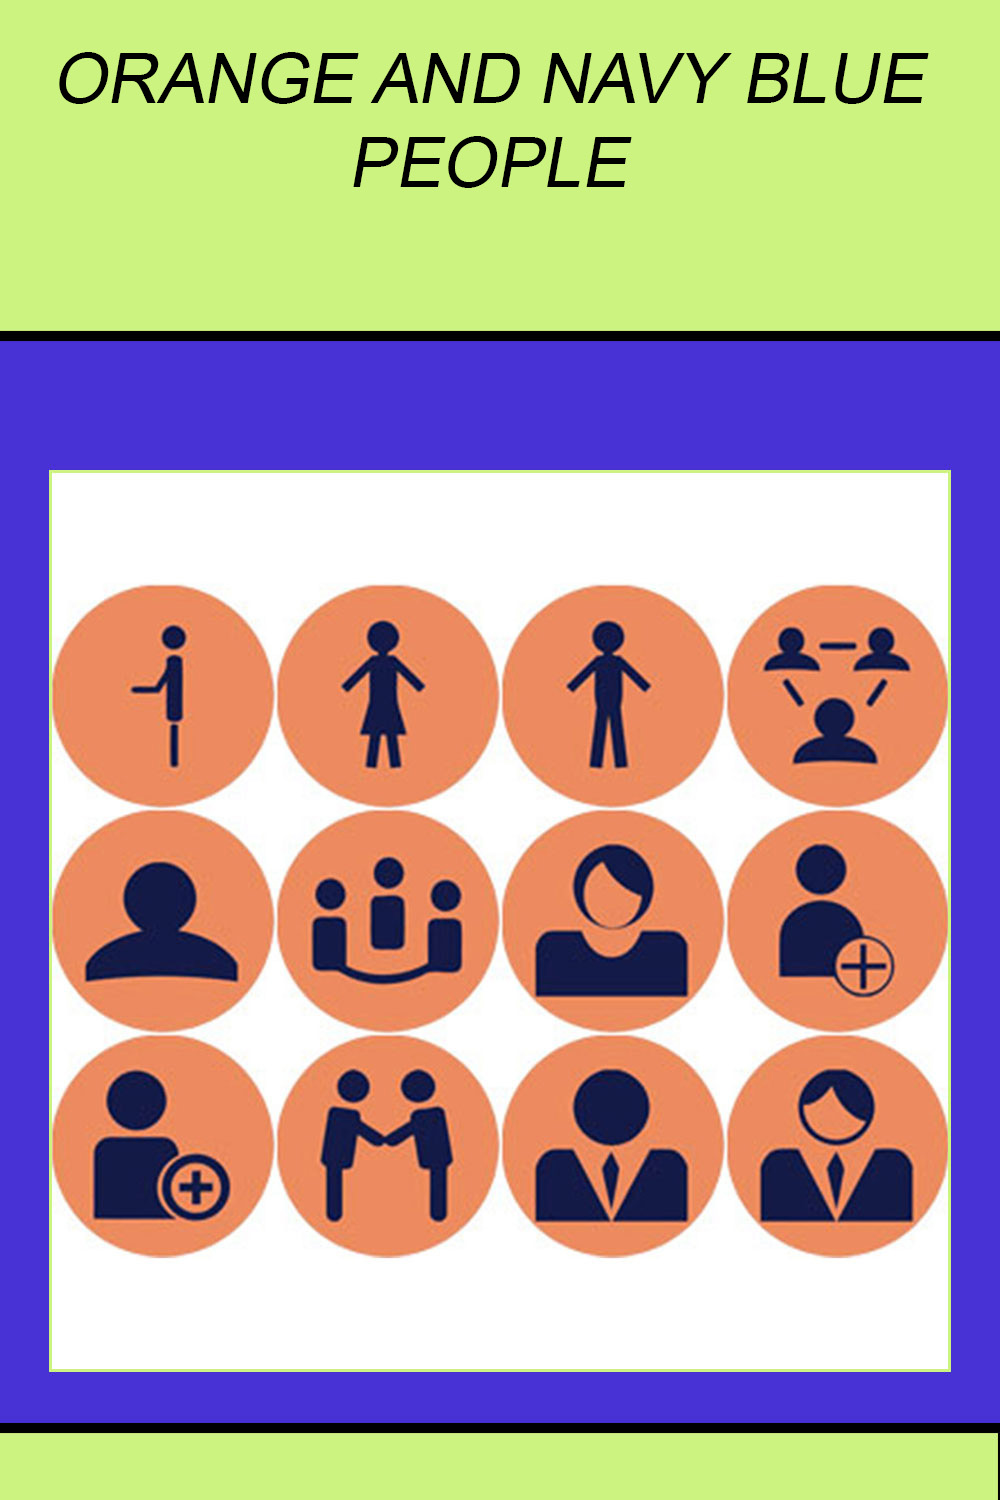 ORANGE AND NAVY BLUE PEOPLE ROUND ICONS pinterest preview image.